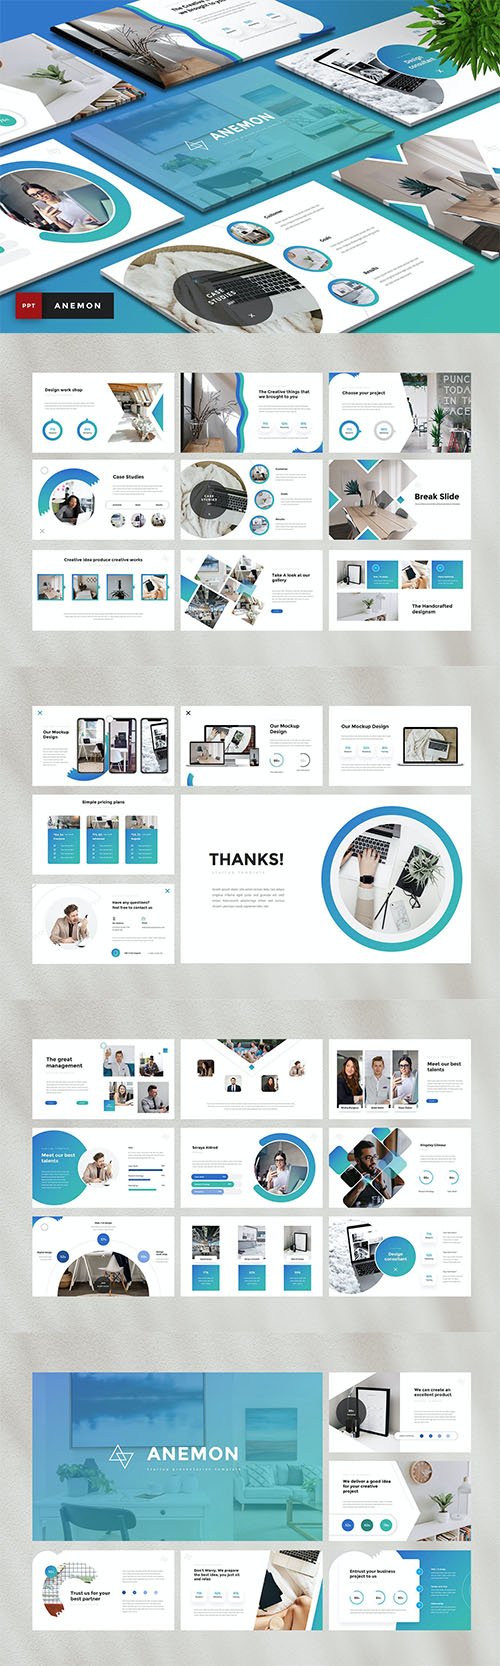 Anemon - StartUp PowerPoint Template